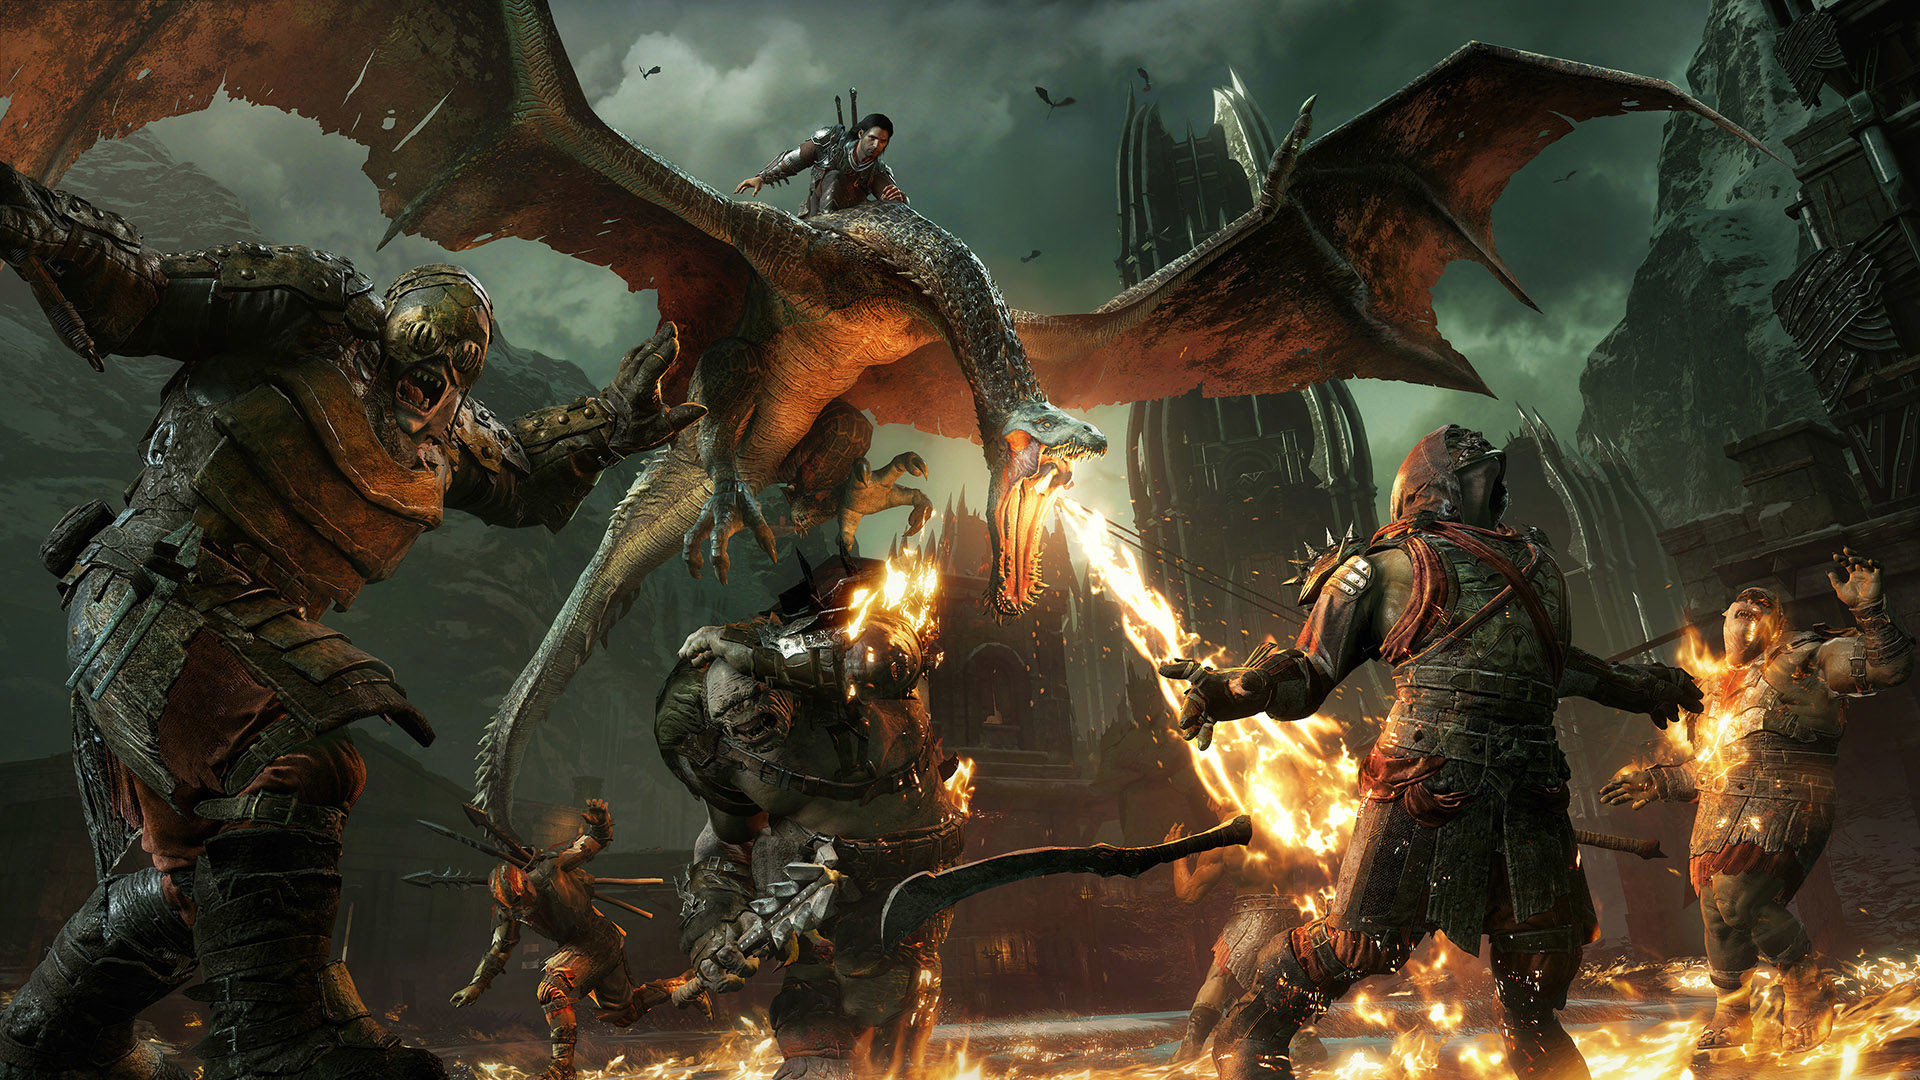 1920x1080 The video game is a sequel to the 2014 release, Middle-earth: Shadow of  Mordor ...